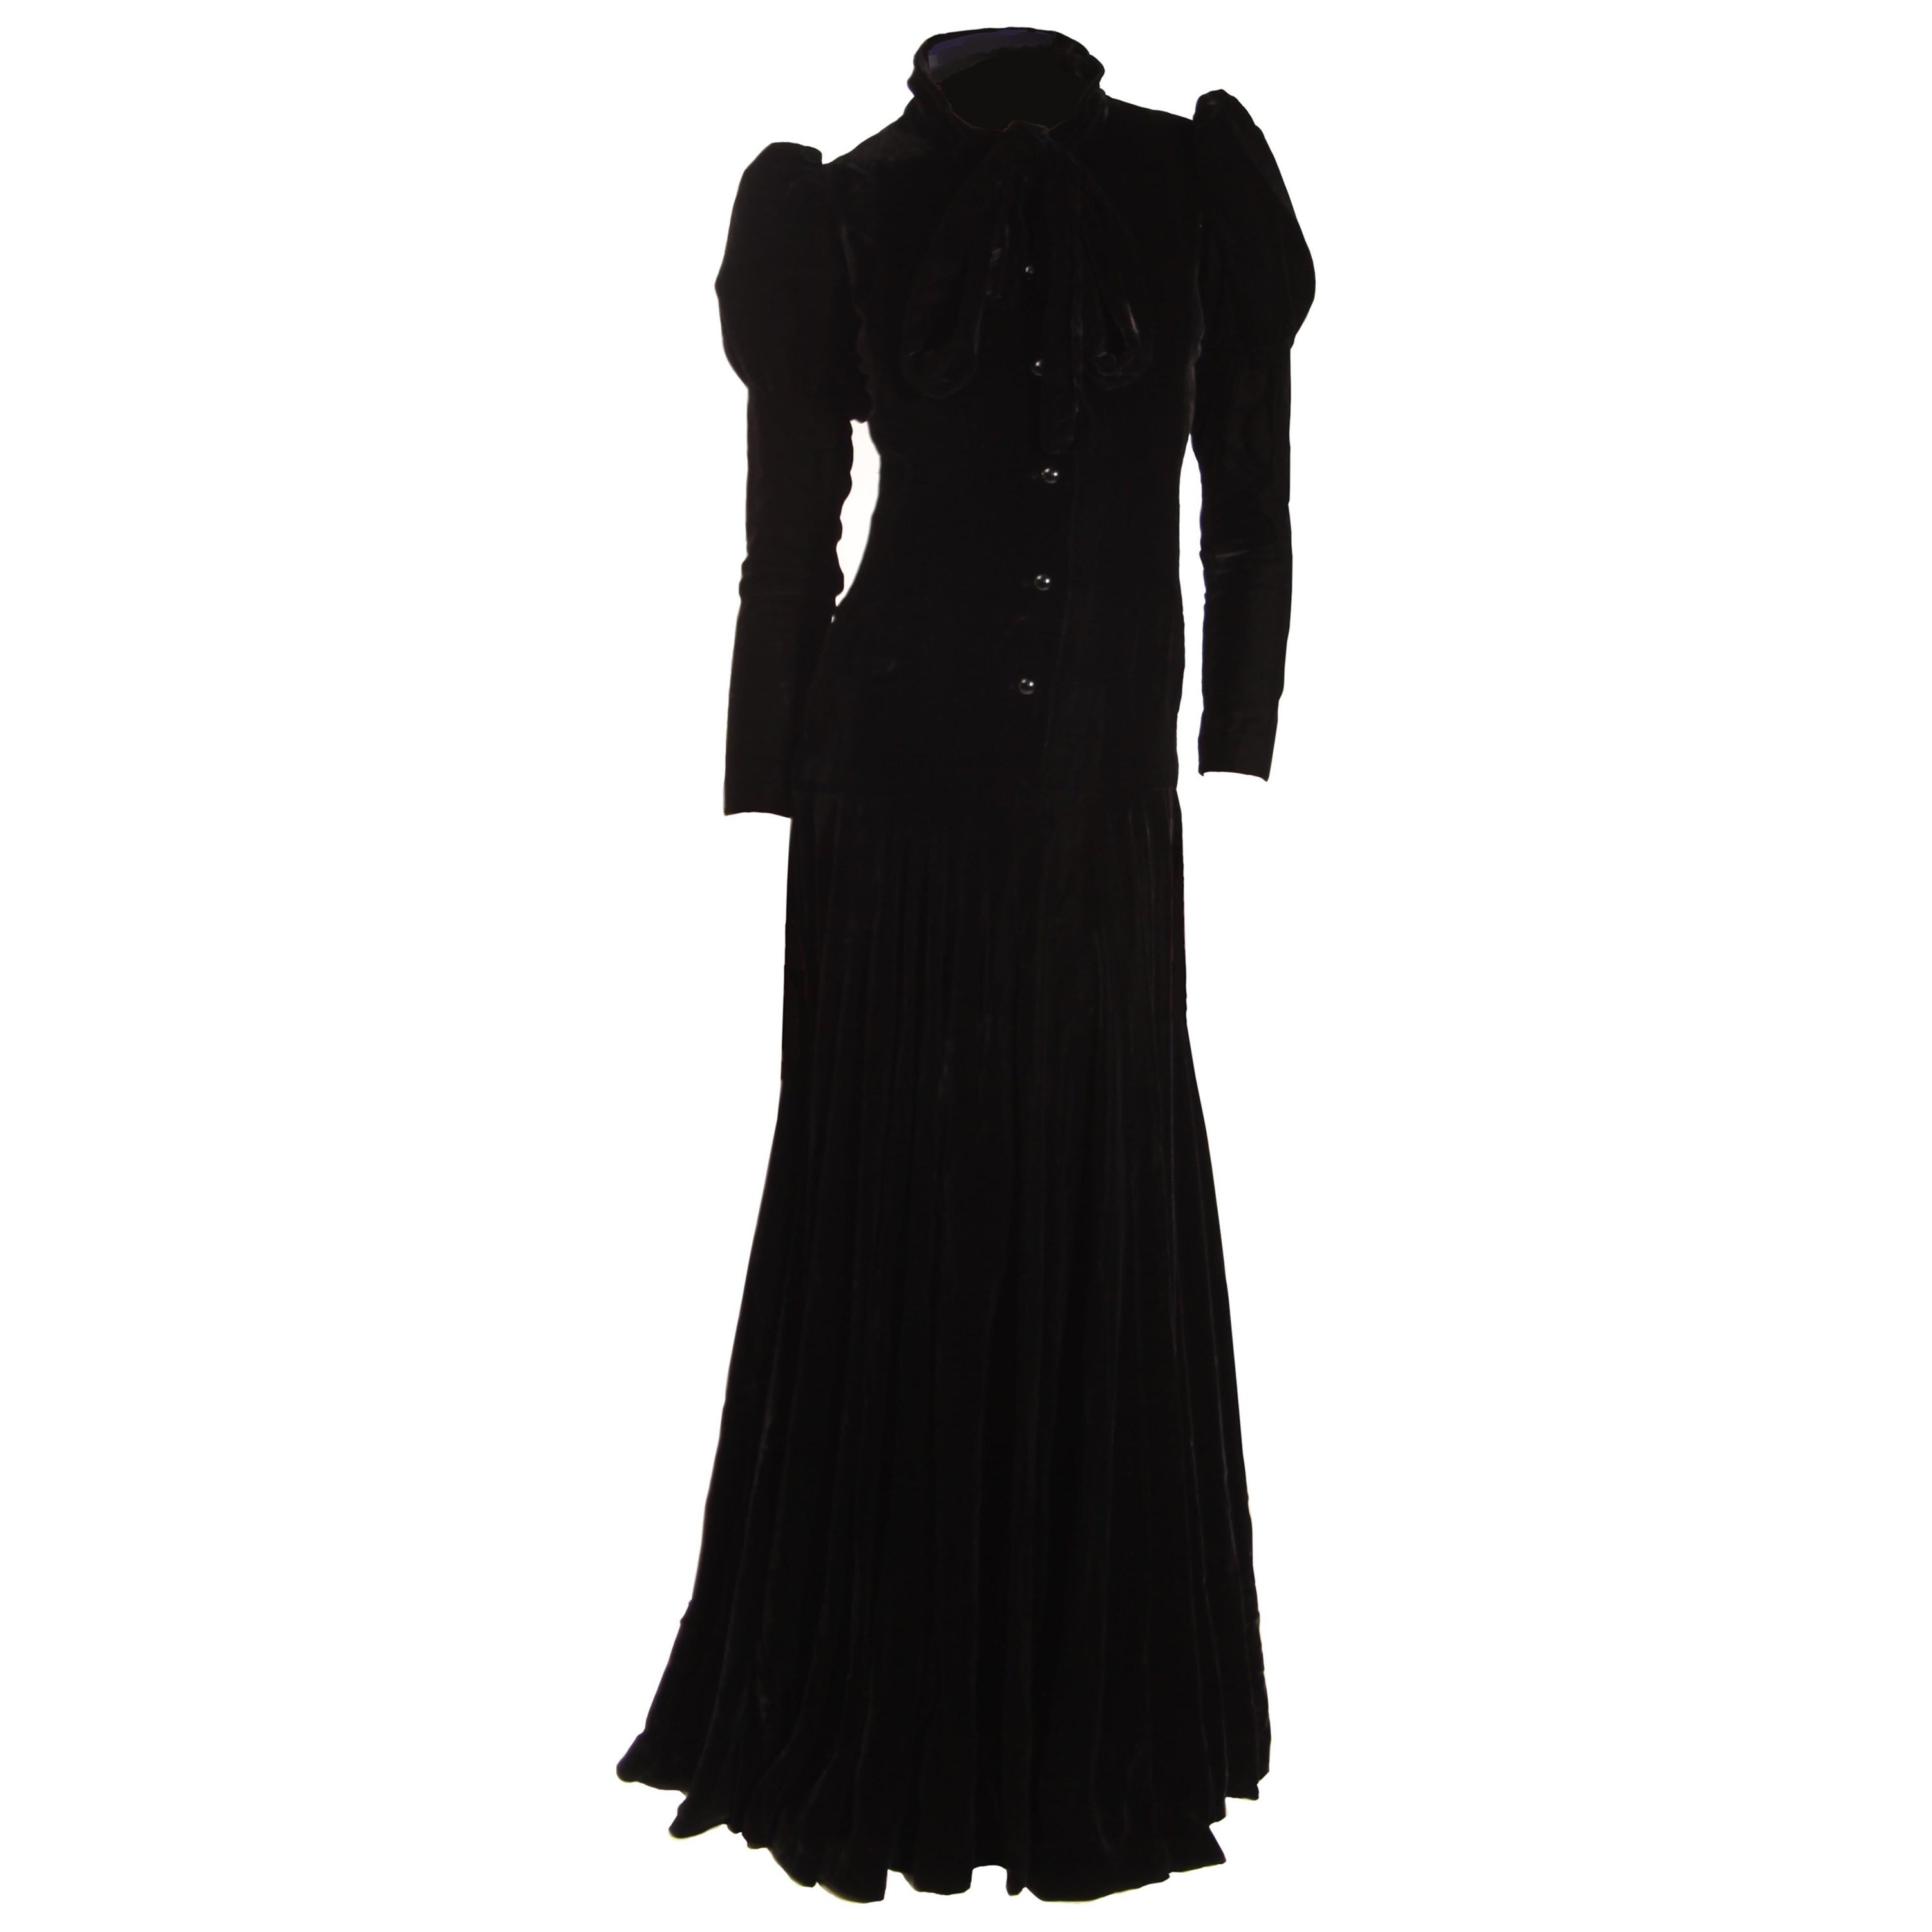 Christian Dior Paris numbered couture black silk evening gown. C. 1960s